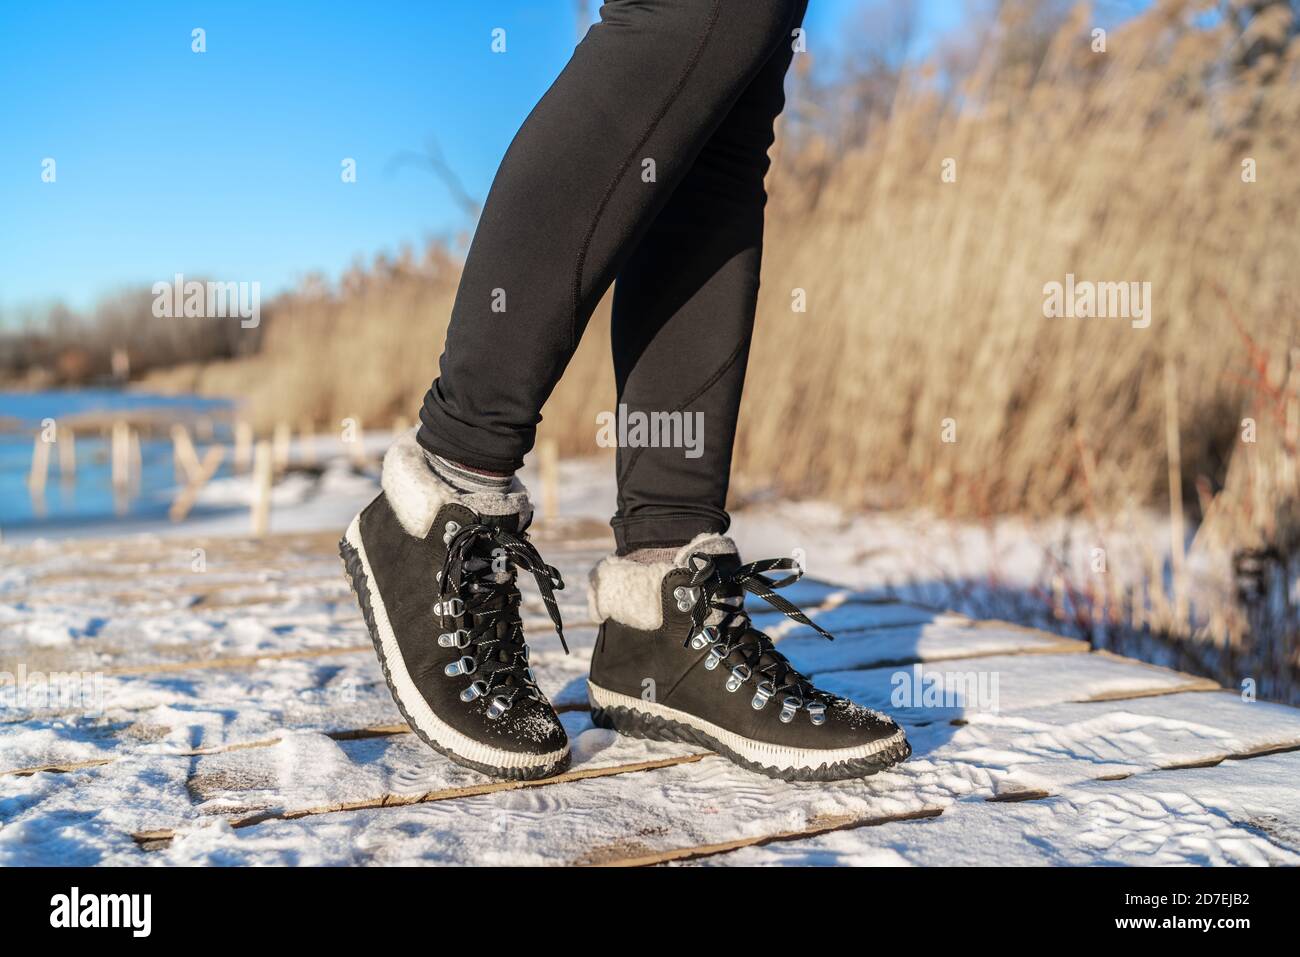 Snow boots fashion footwear for winter season girl wearing black leather ankle shoes Stock Photo